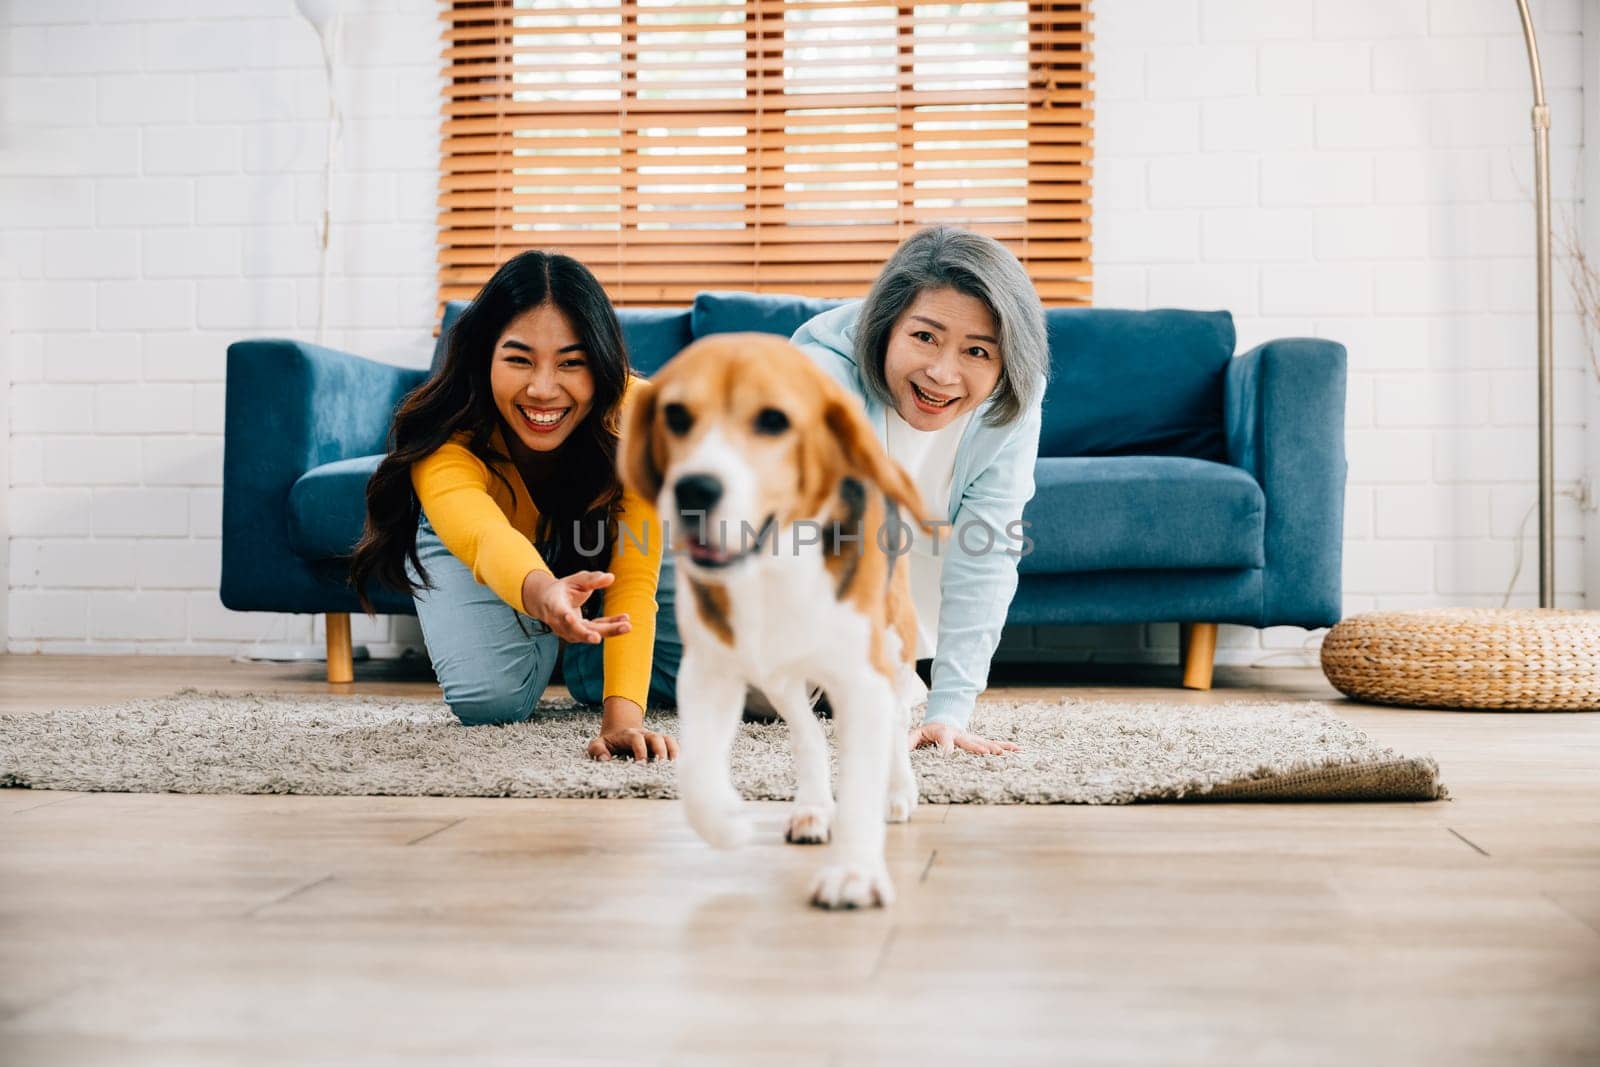 In the comfort of their home, a cheerful woman and her mother playfully run with their Beagle dog in the living room. Their friendly bond and weekend activity bring joy to the scene. pet love